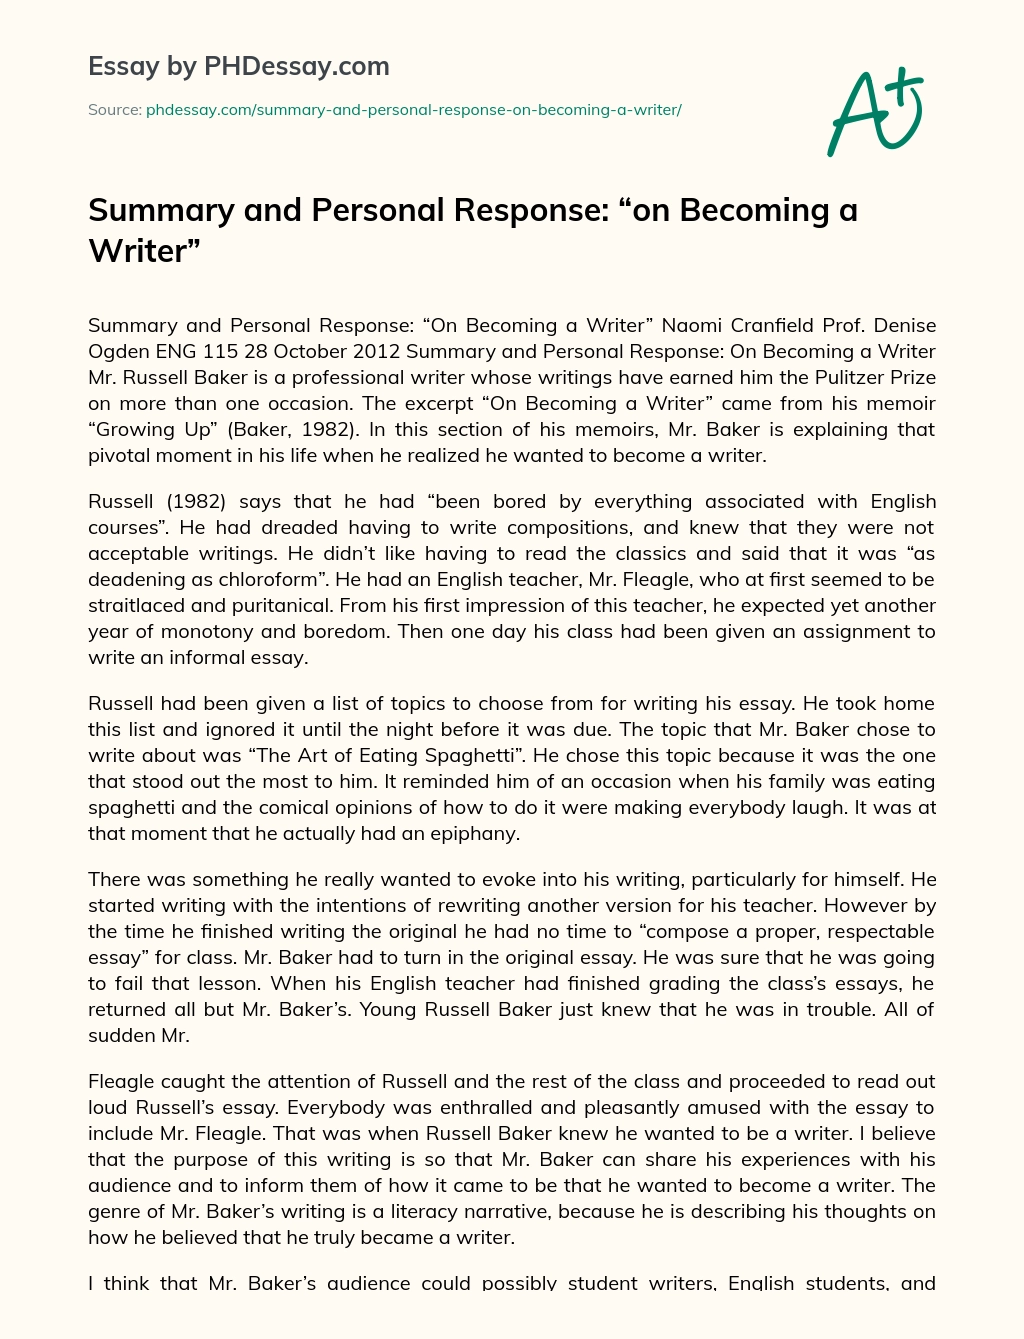 Summary and Personal Response: “on Becoming a Writer” essay